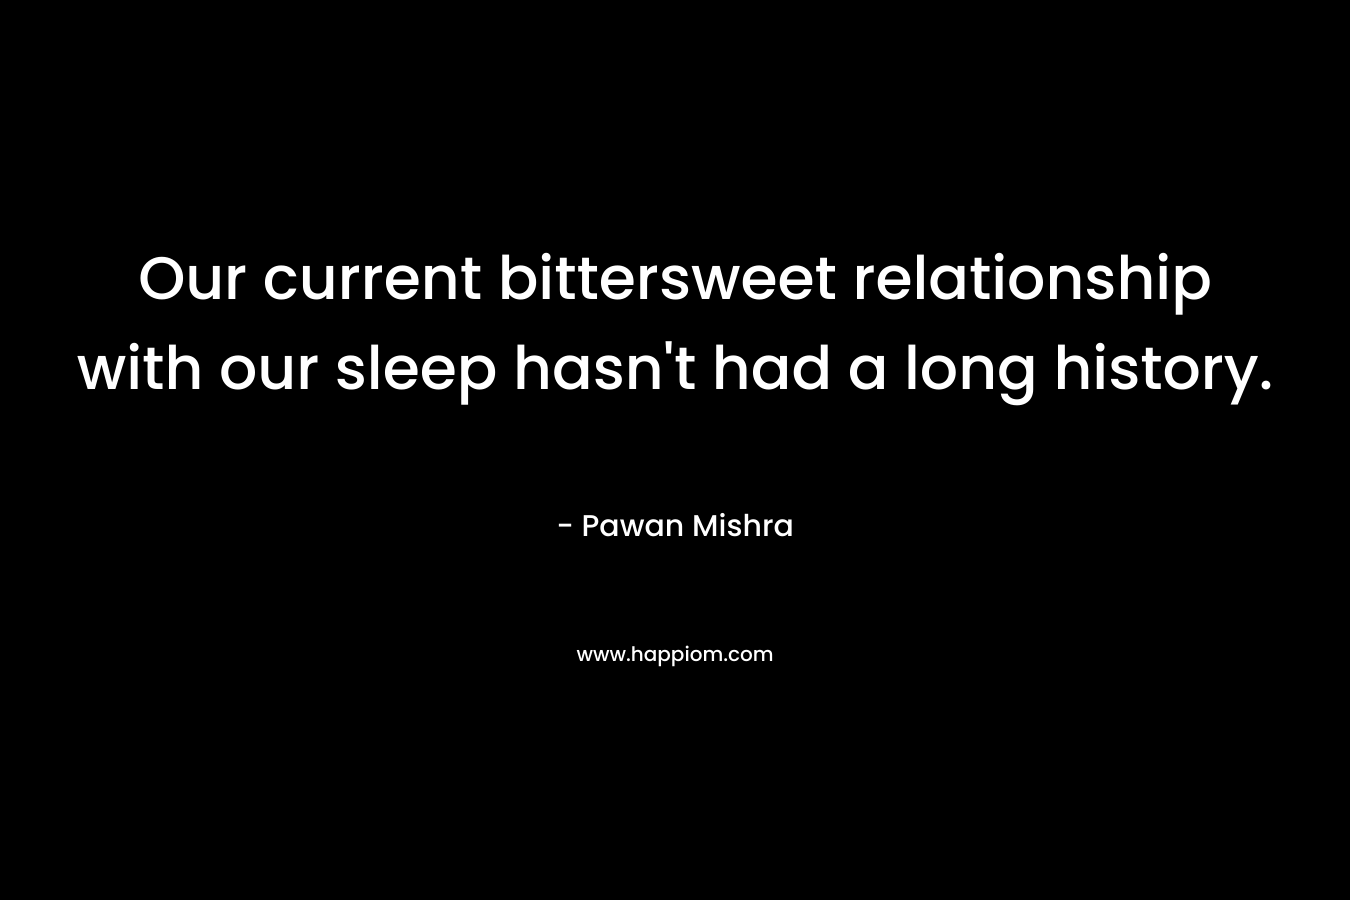 Our current bittersweet relationship with our sleep hasn’t had a long history. – Pawan Mishra